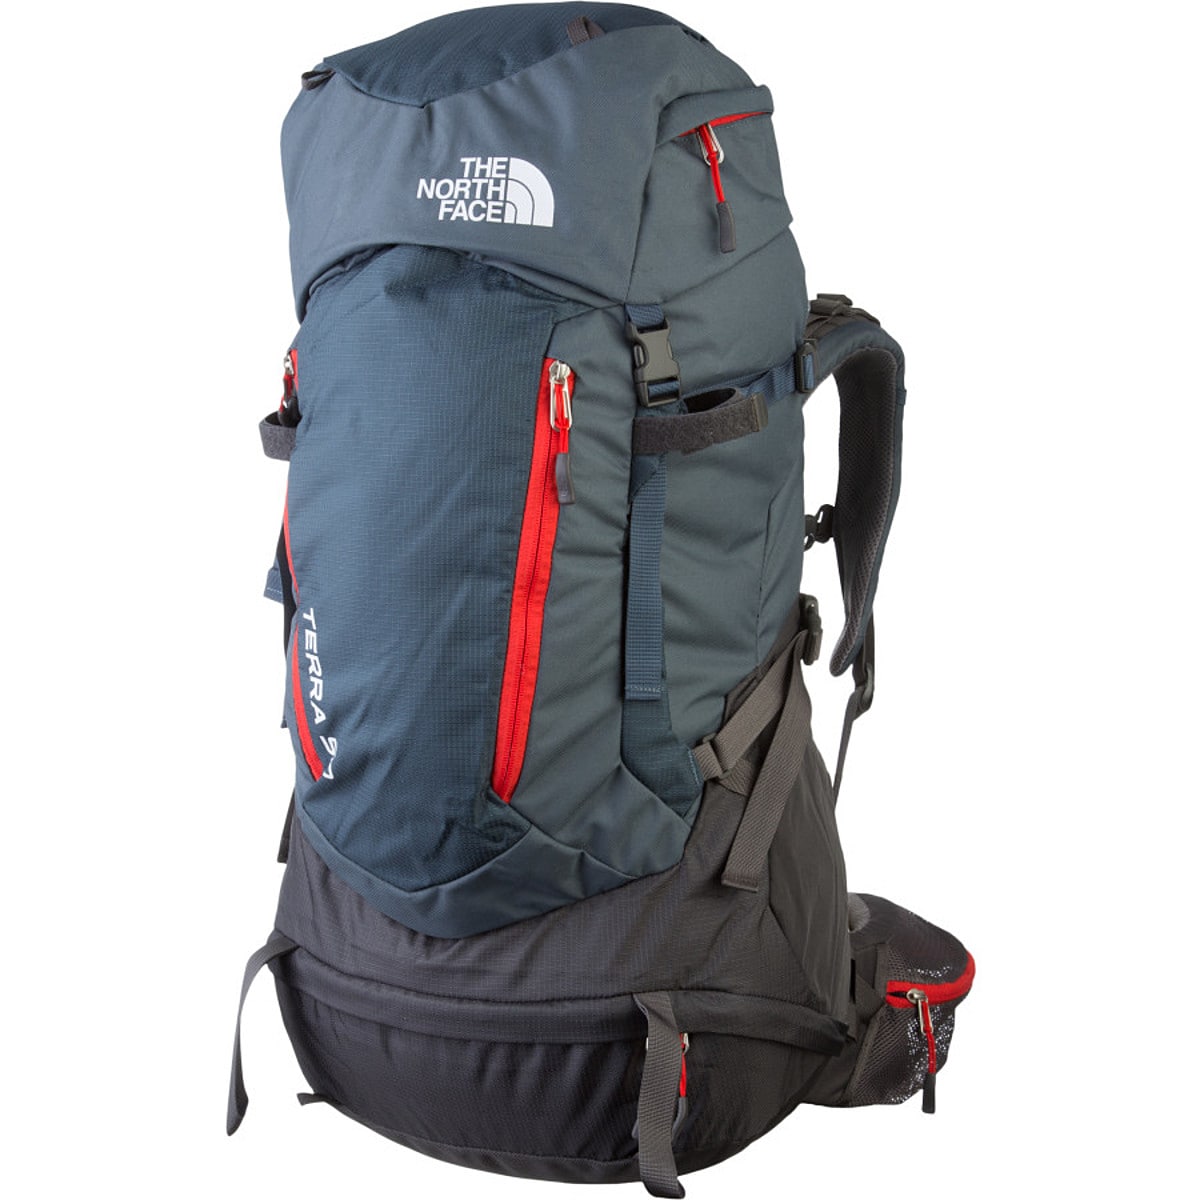 The North Face Terra 50L Backpack - Hike & Camp